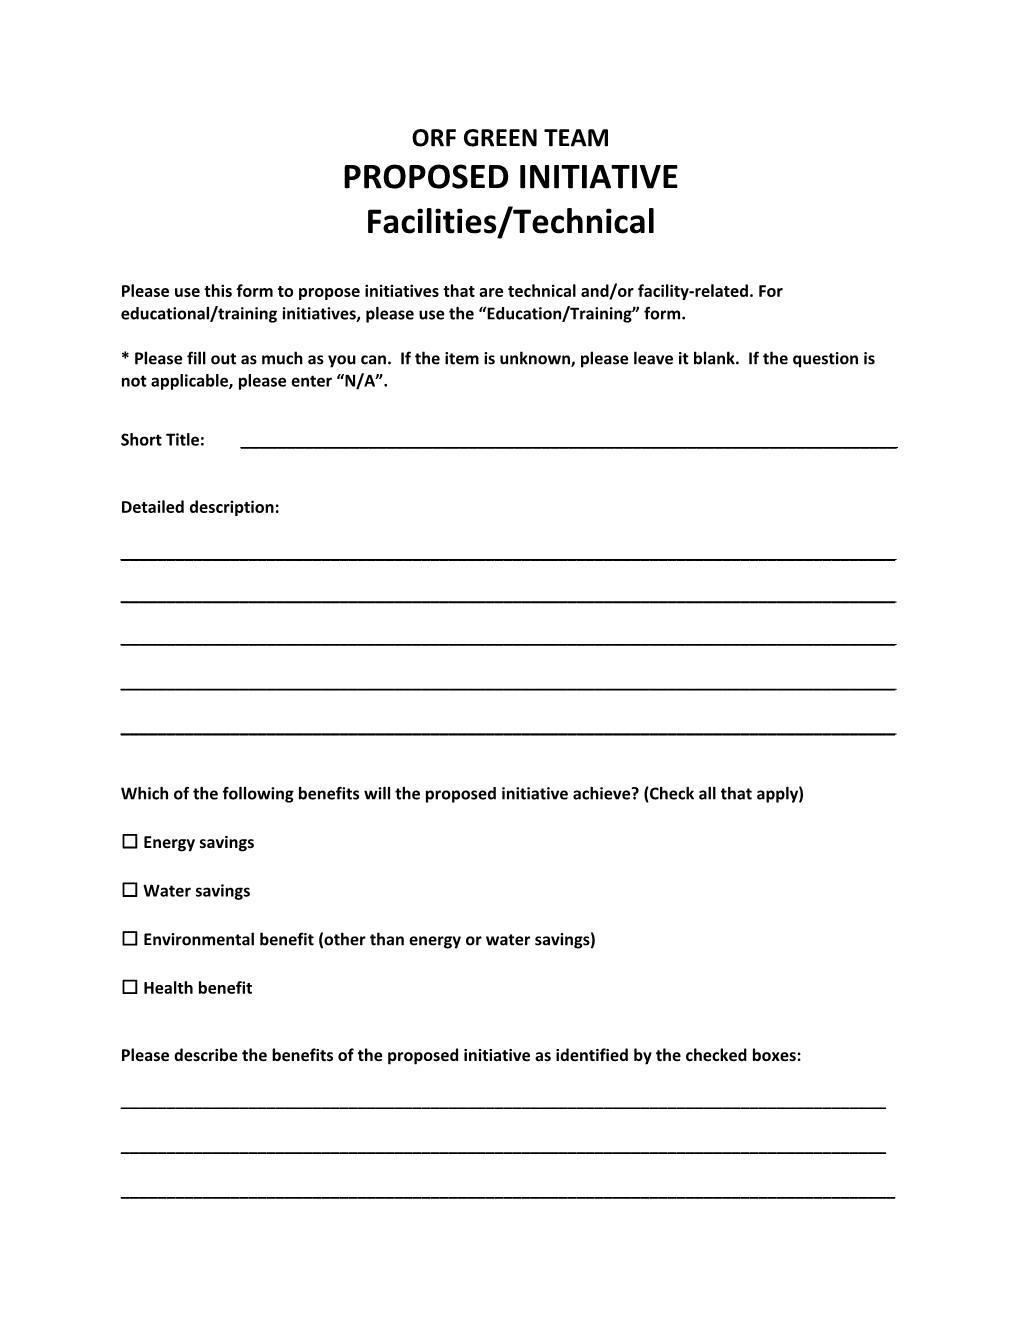 Green Team Proposed Initiative Form